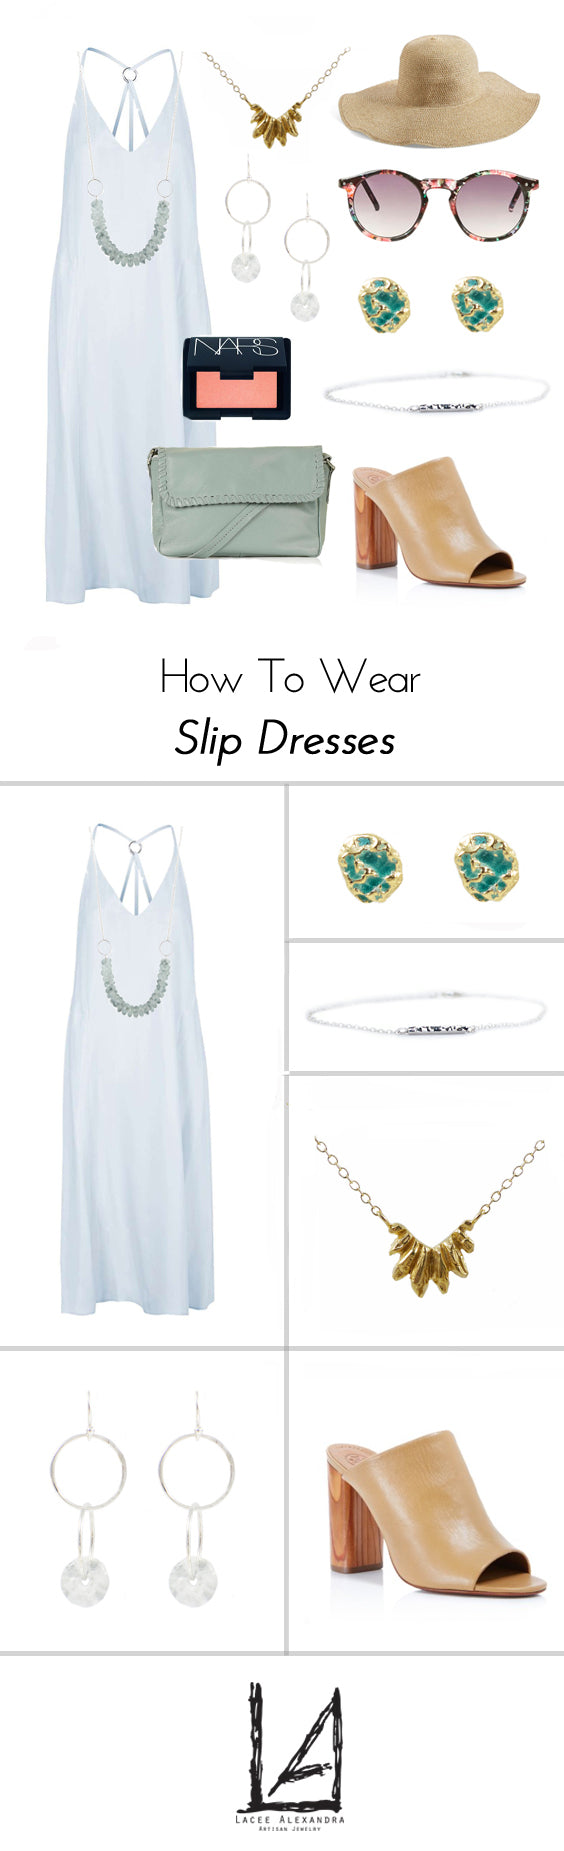 How To Wear Slip Dresses with Lacee Alexandra, click for details!